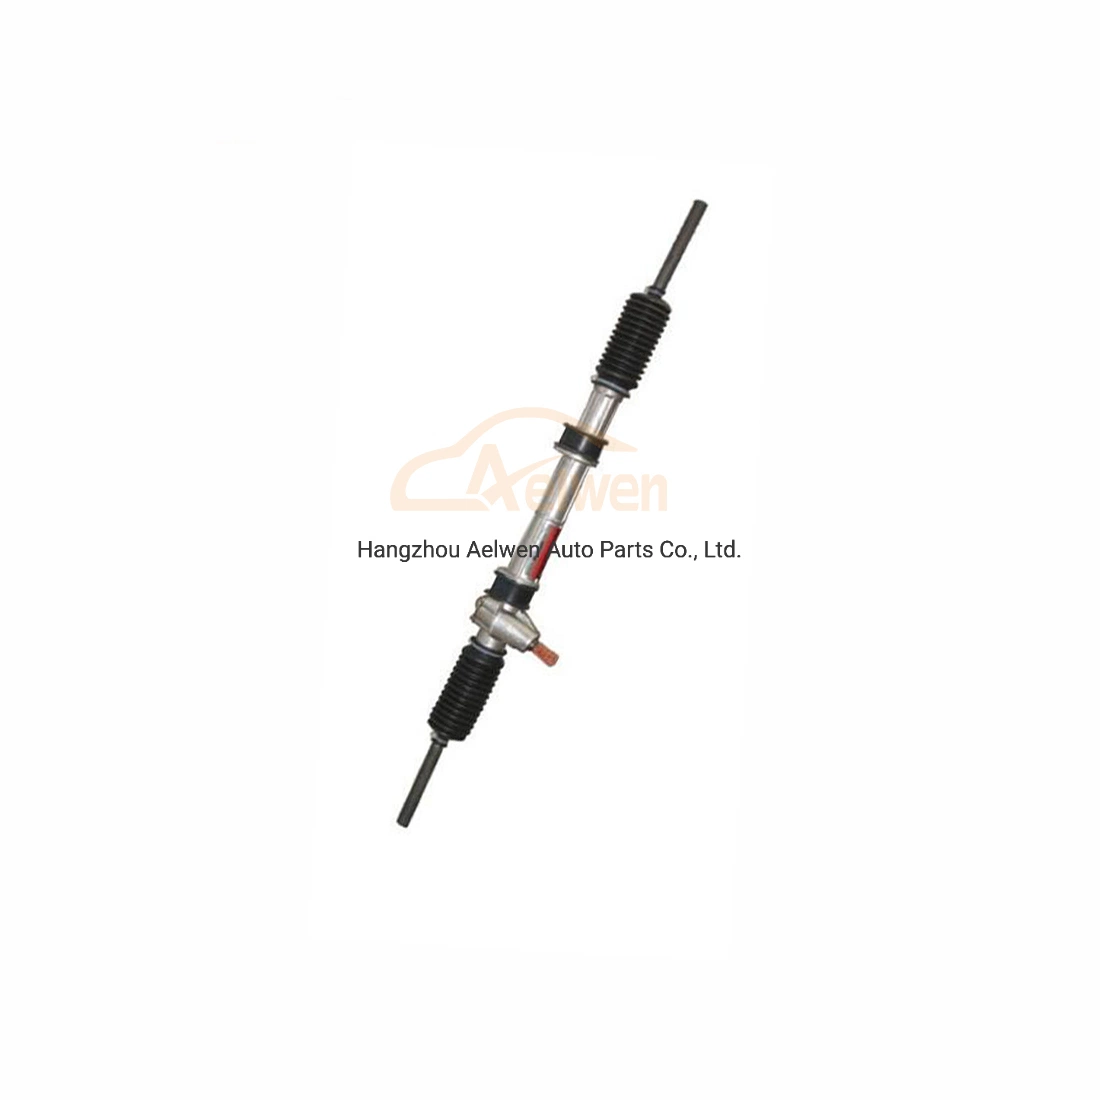 Aelwen Car Auto Steering Gear Rack Pinion Used for Ford Belina II for Corcei II for Verona for Logus for Pointe Be1e3w504A